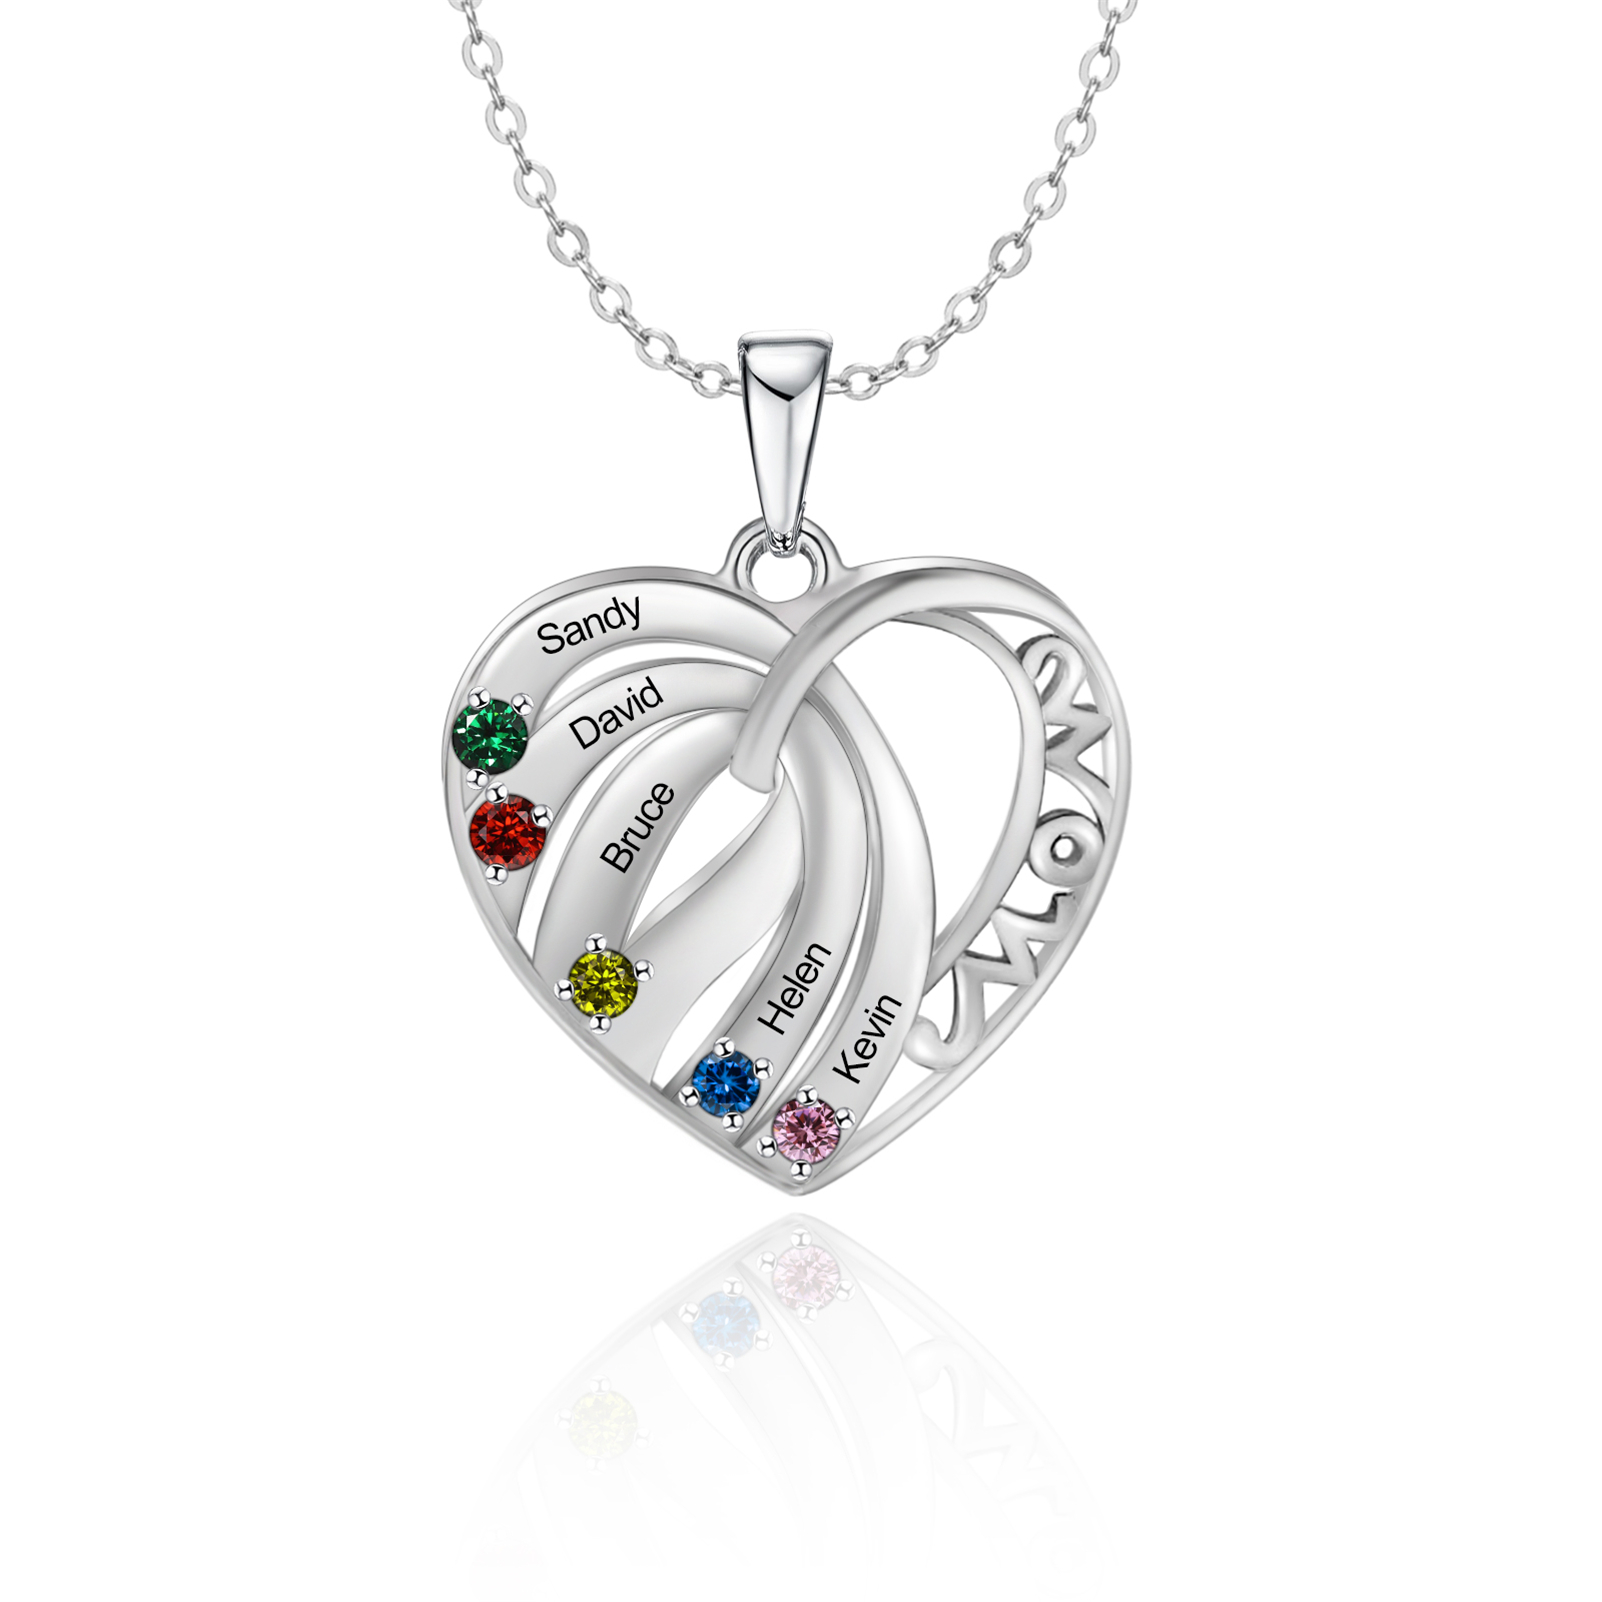 6-5 Love Heart Pendant Necklace Name Necklace with Engraving